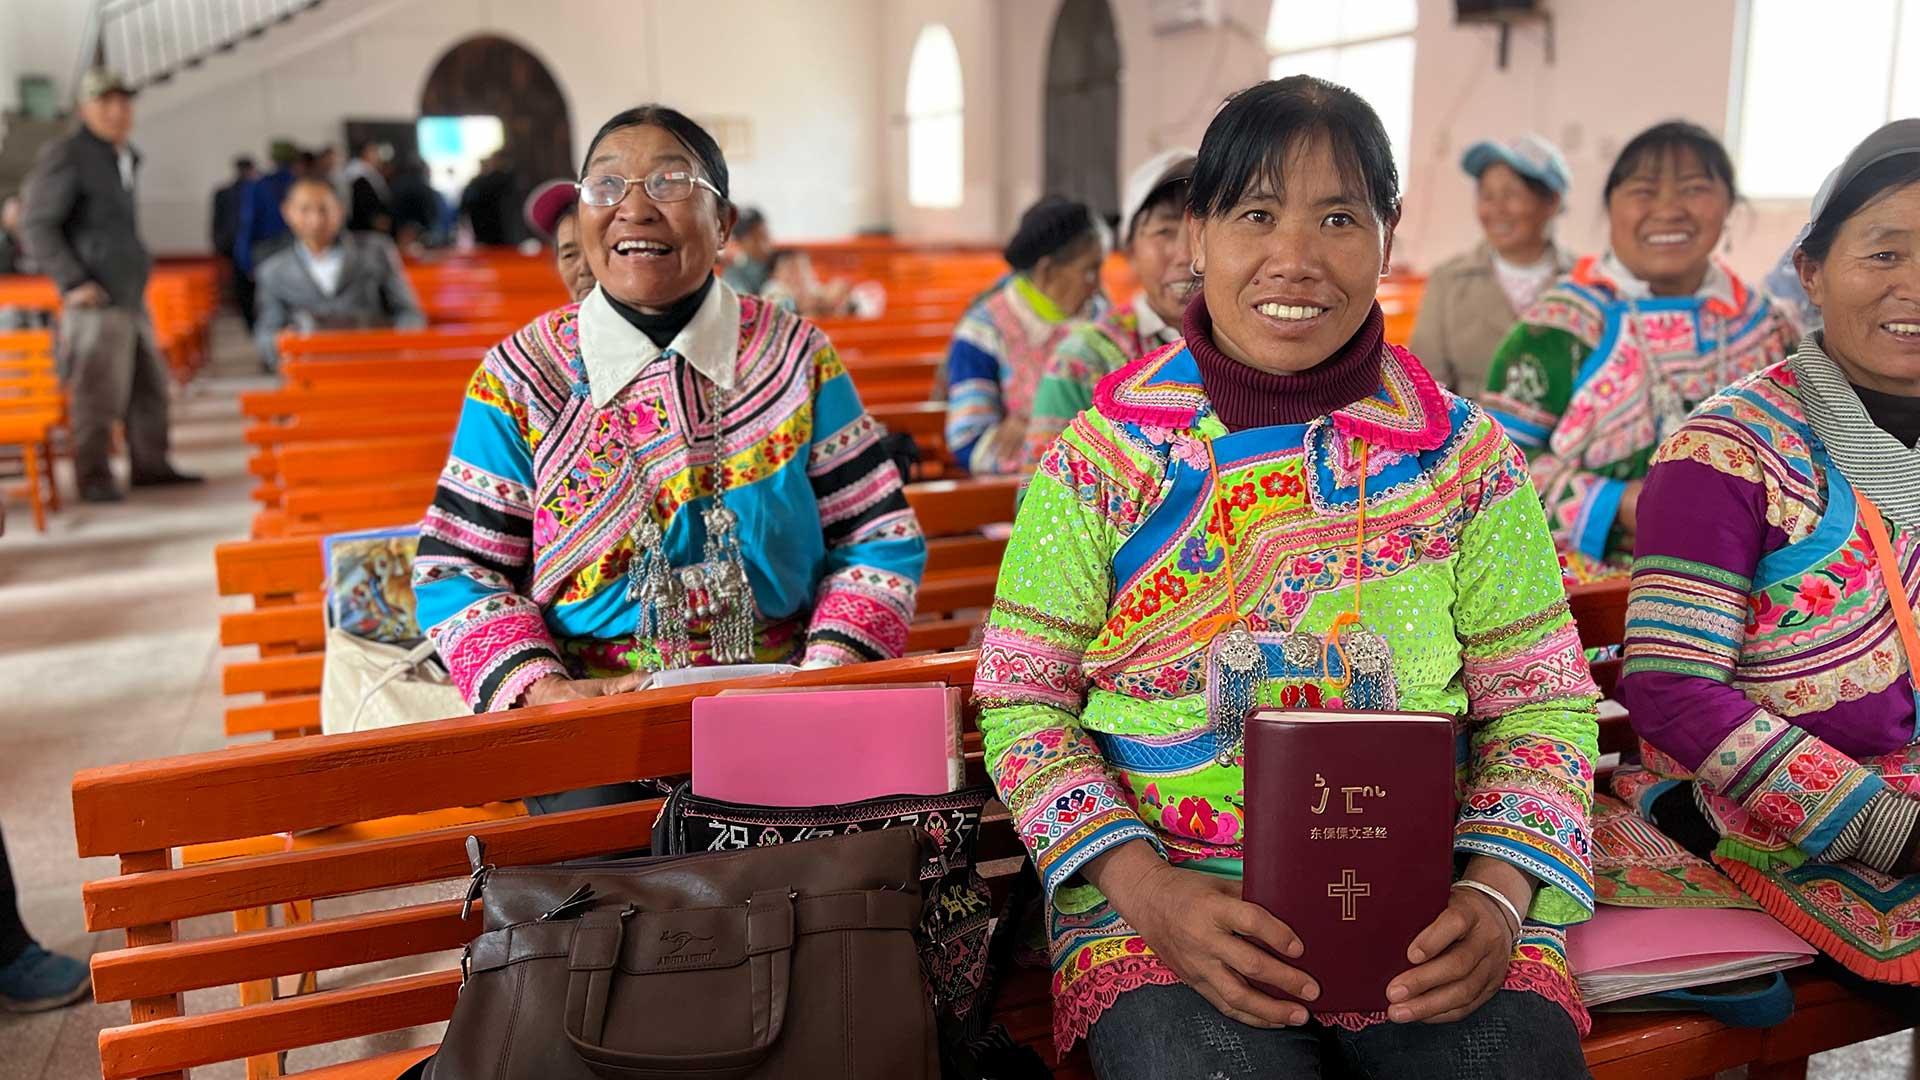 We visited the East Lisu minority community in China to see how they are getting on with the Bible that was translated into their dialect for the first time.